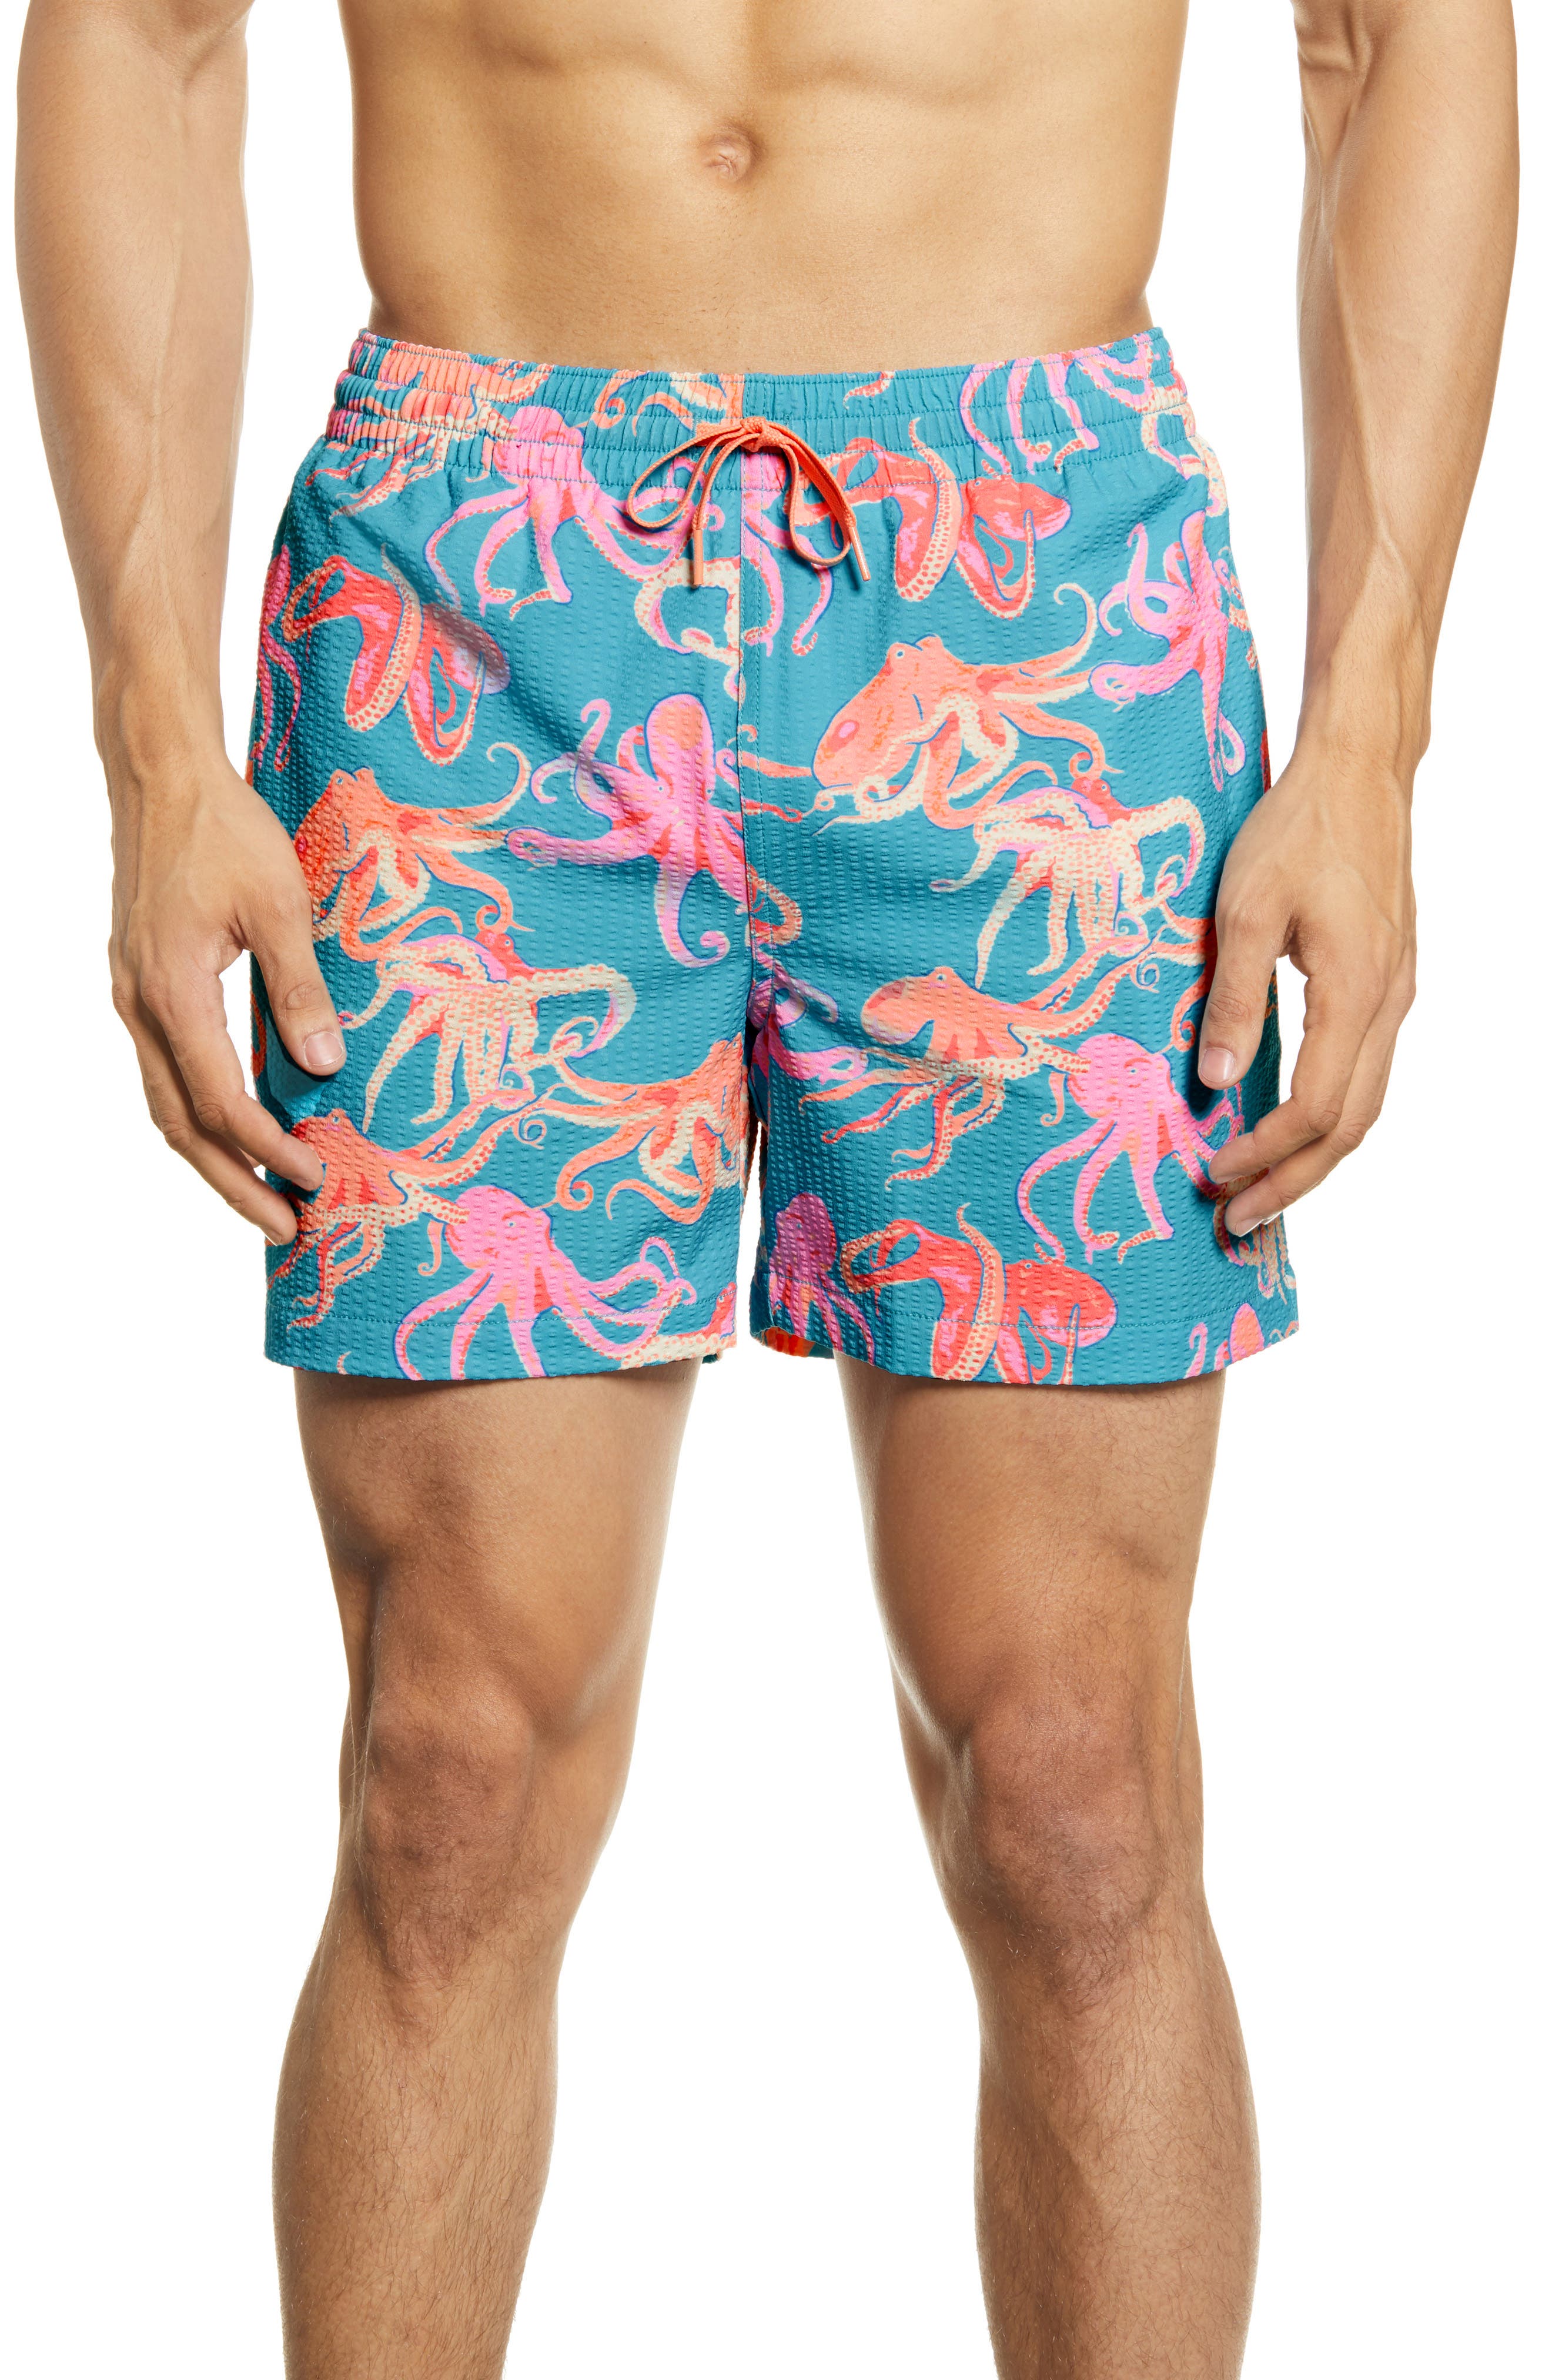 chubbies bathing suits,OFF 53%,www.concordehotels.com.tr